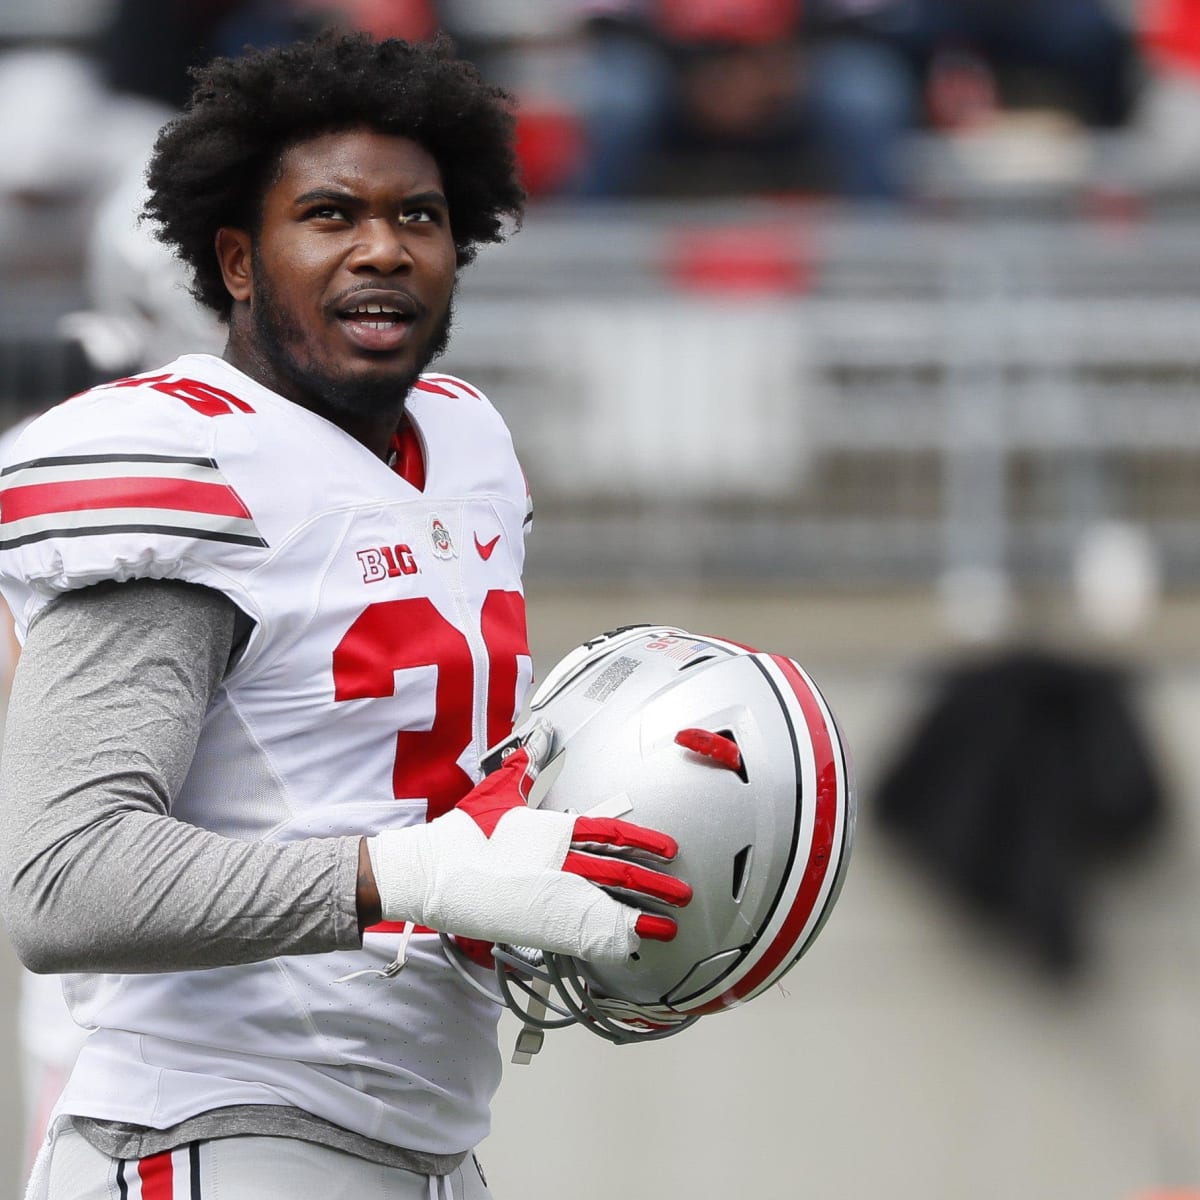 Dismissed from Ohio State, LB K'Vaughan Pope apologizes after storming off  field during Akron game 